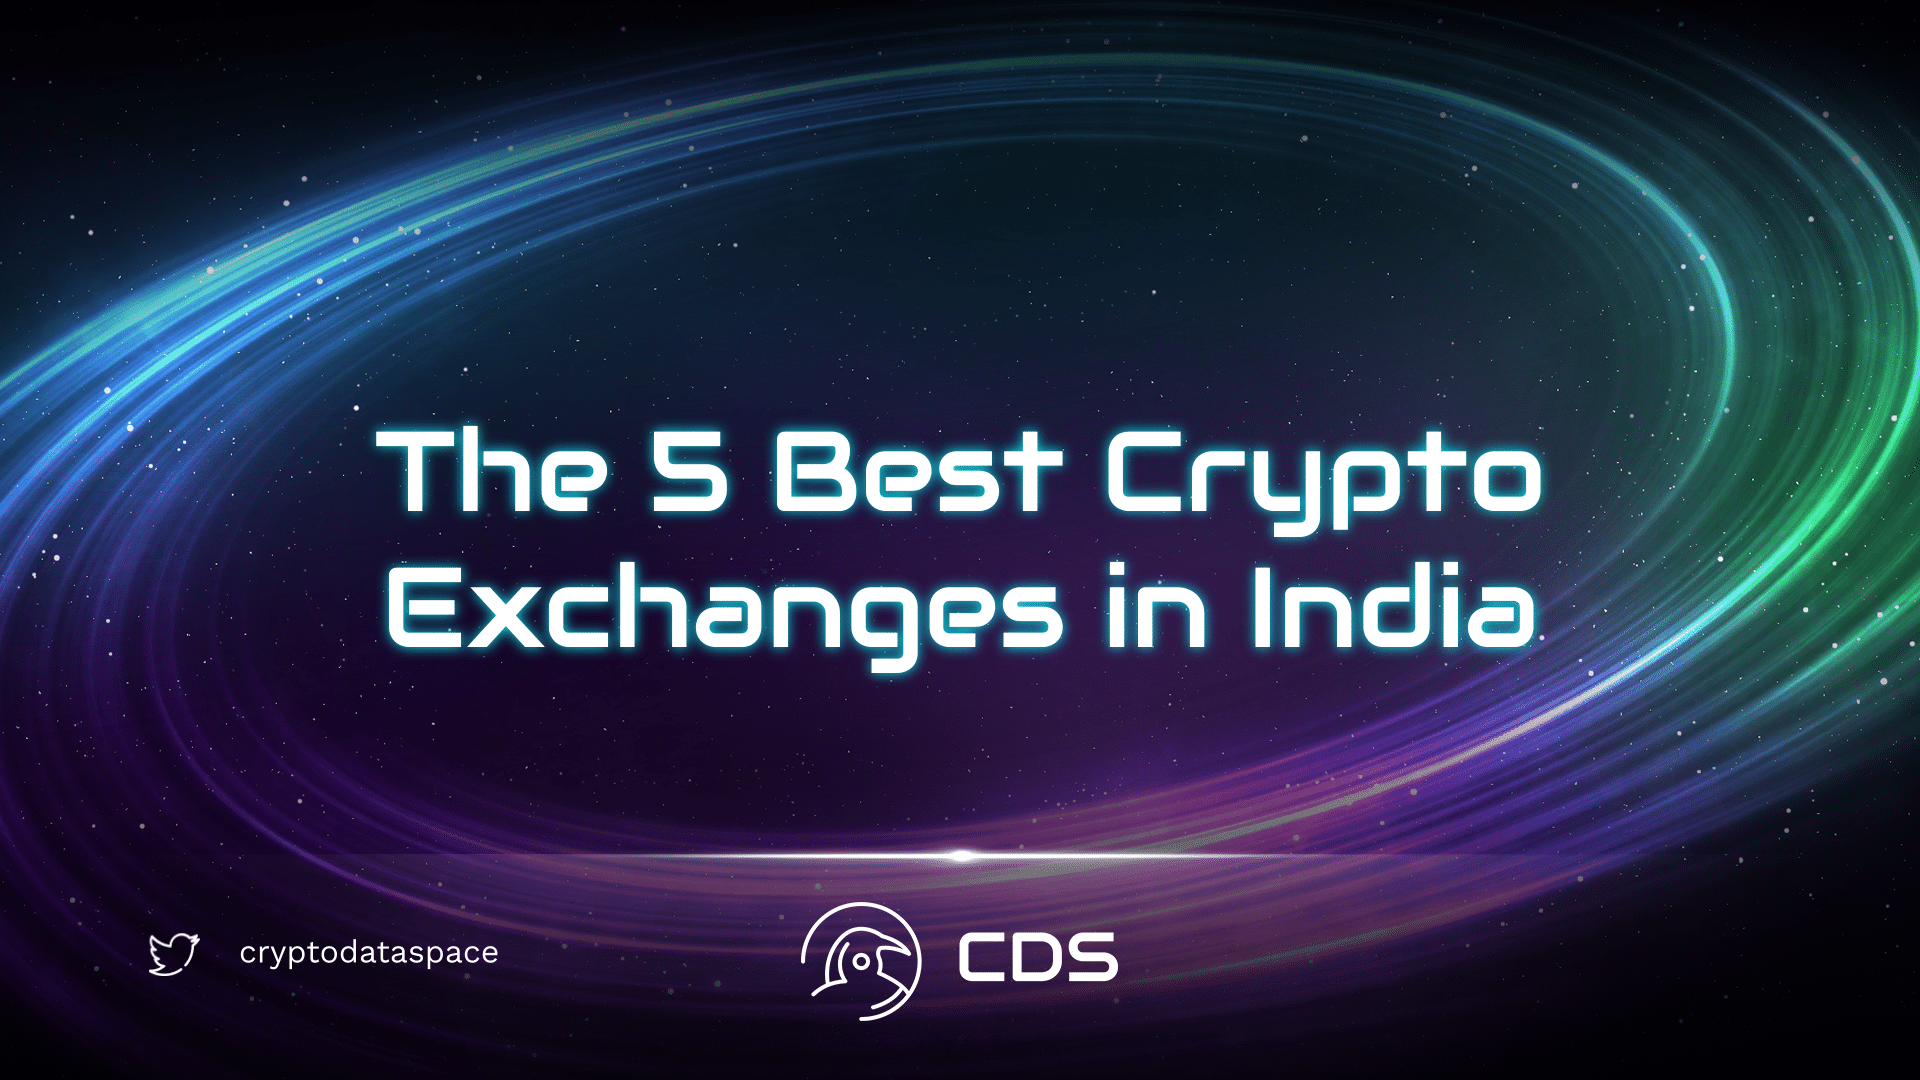 The 5 Best Crypto Exchanges in India